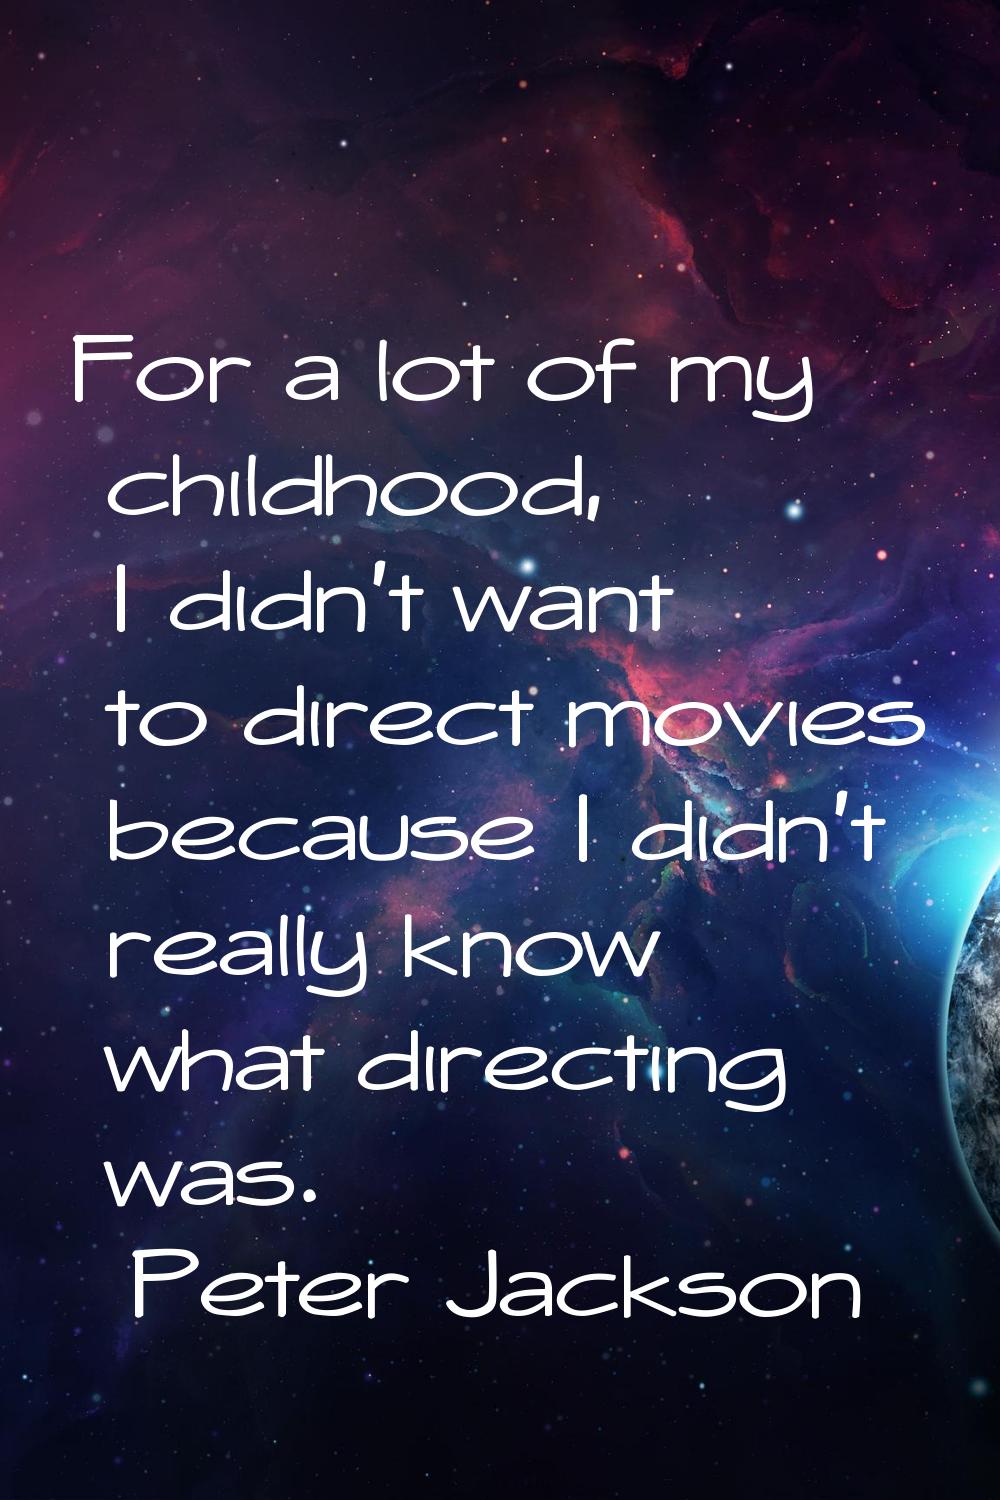 For a lot of my childhood, I didn't want to direct movies because I didn't really know what directi